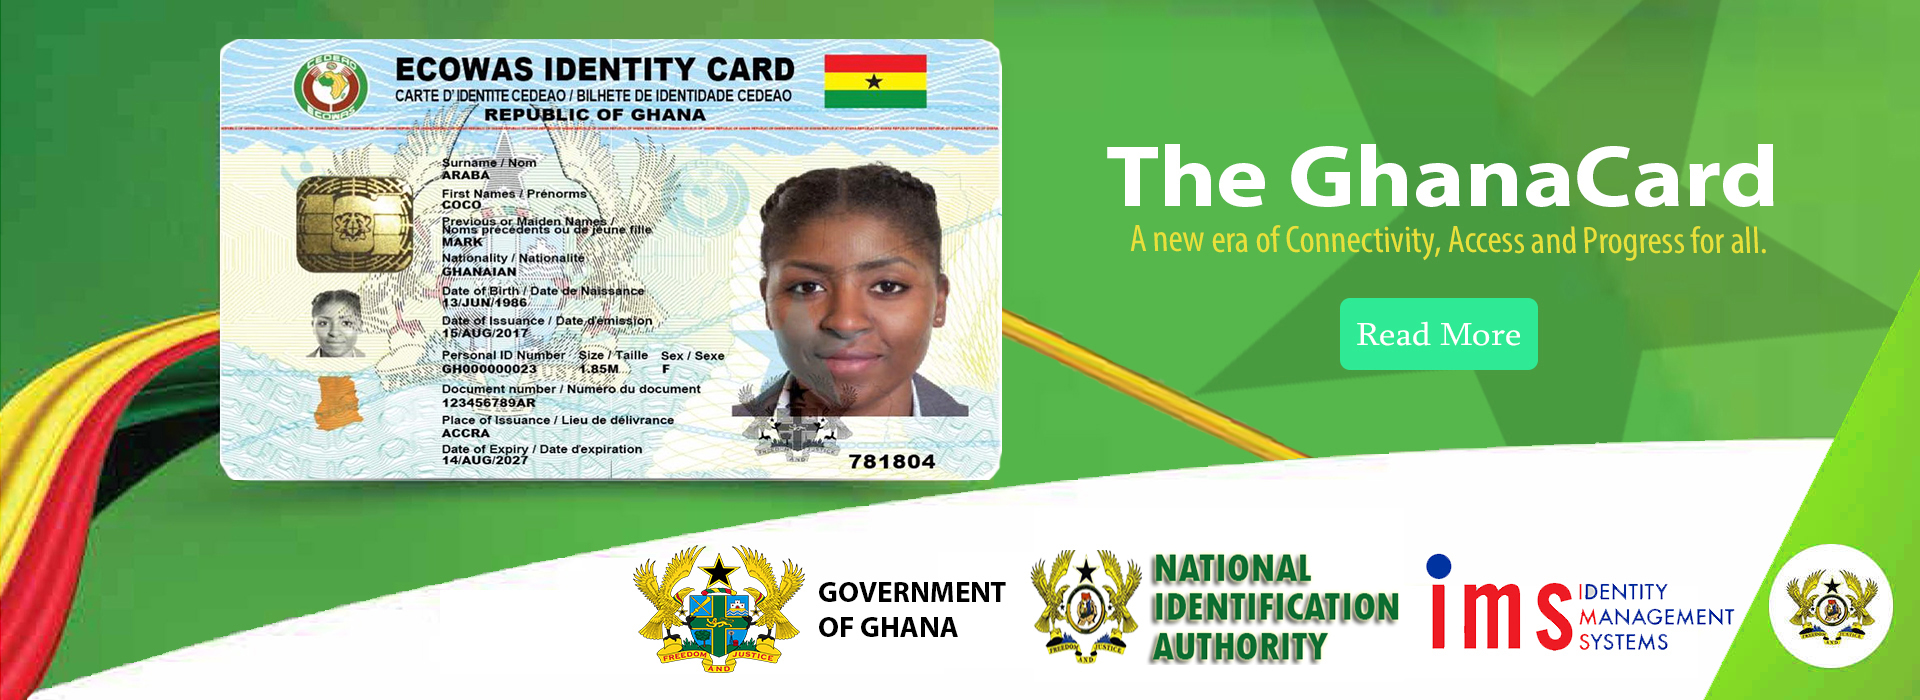 How To Link Your Ghana Card To Your Health Insurance